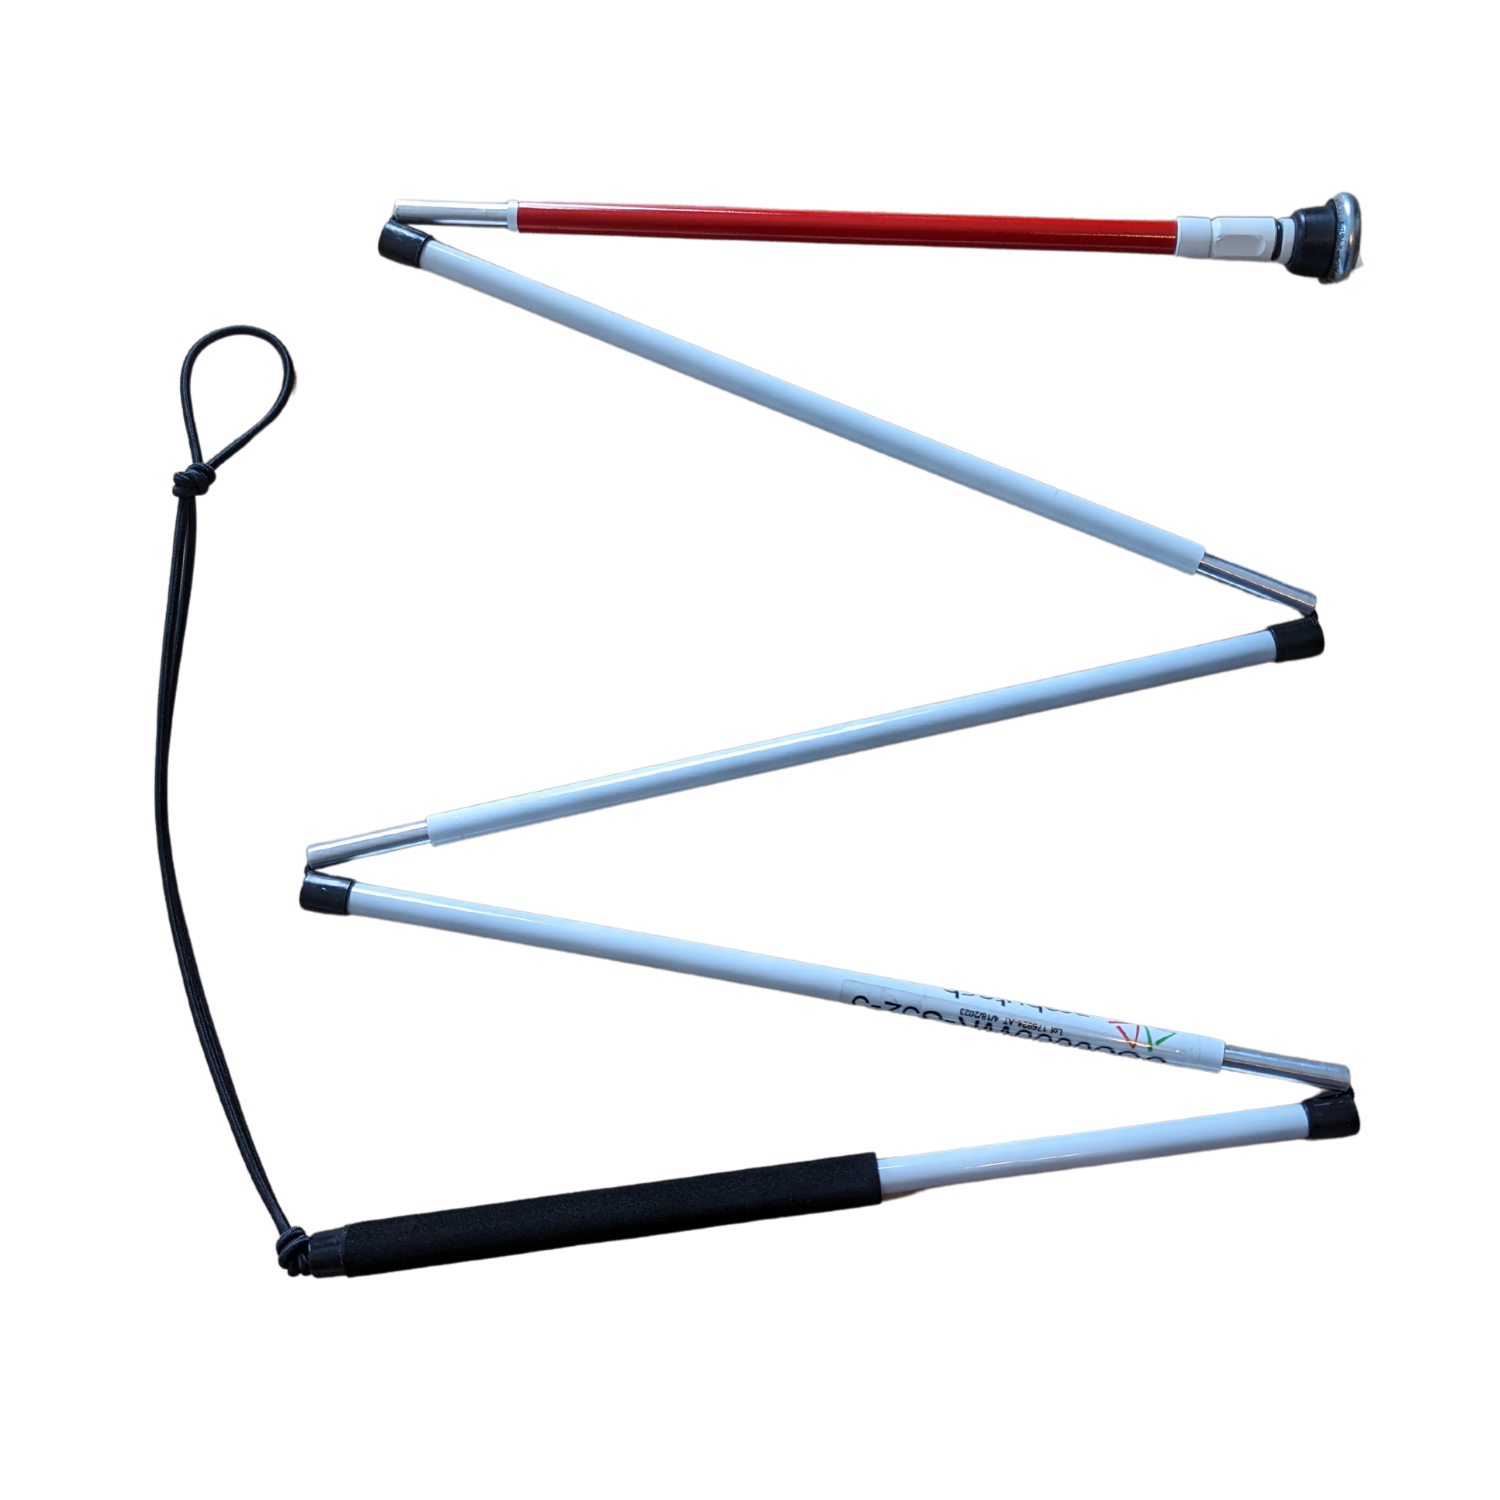 Image of Ambutech's Slimline mobility cane with stainless steel metal glide disk tip.